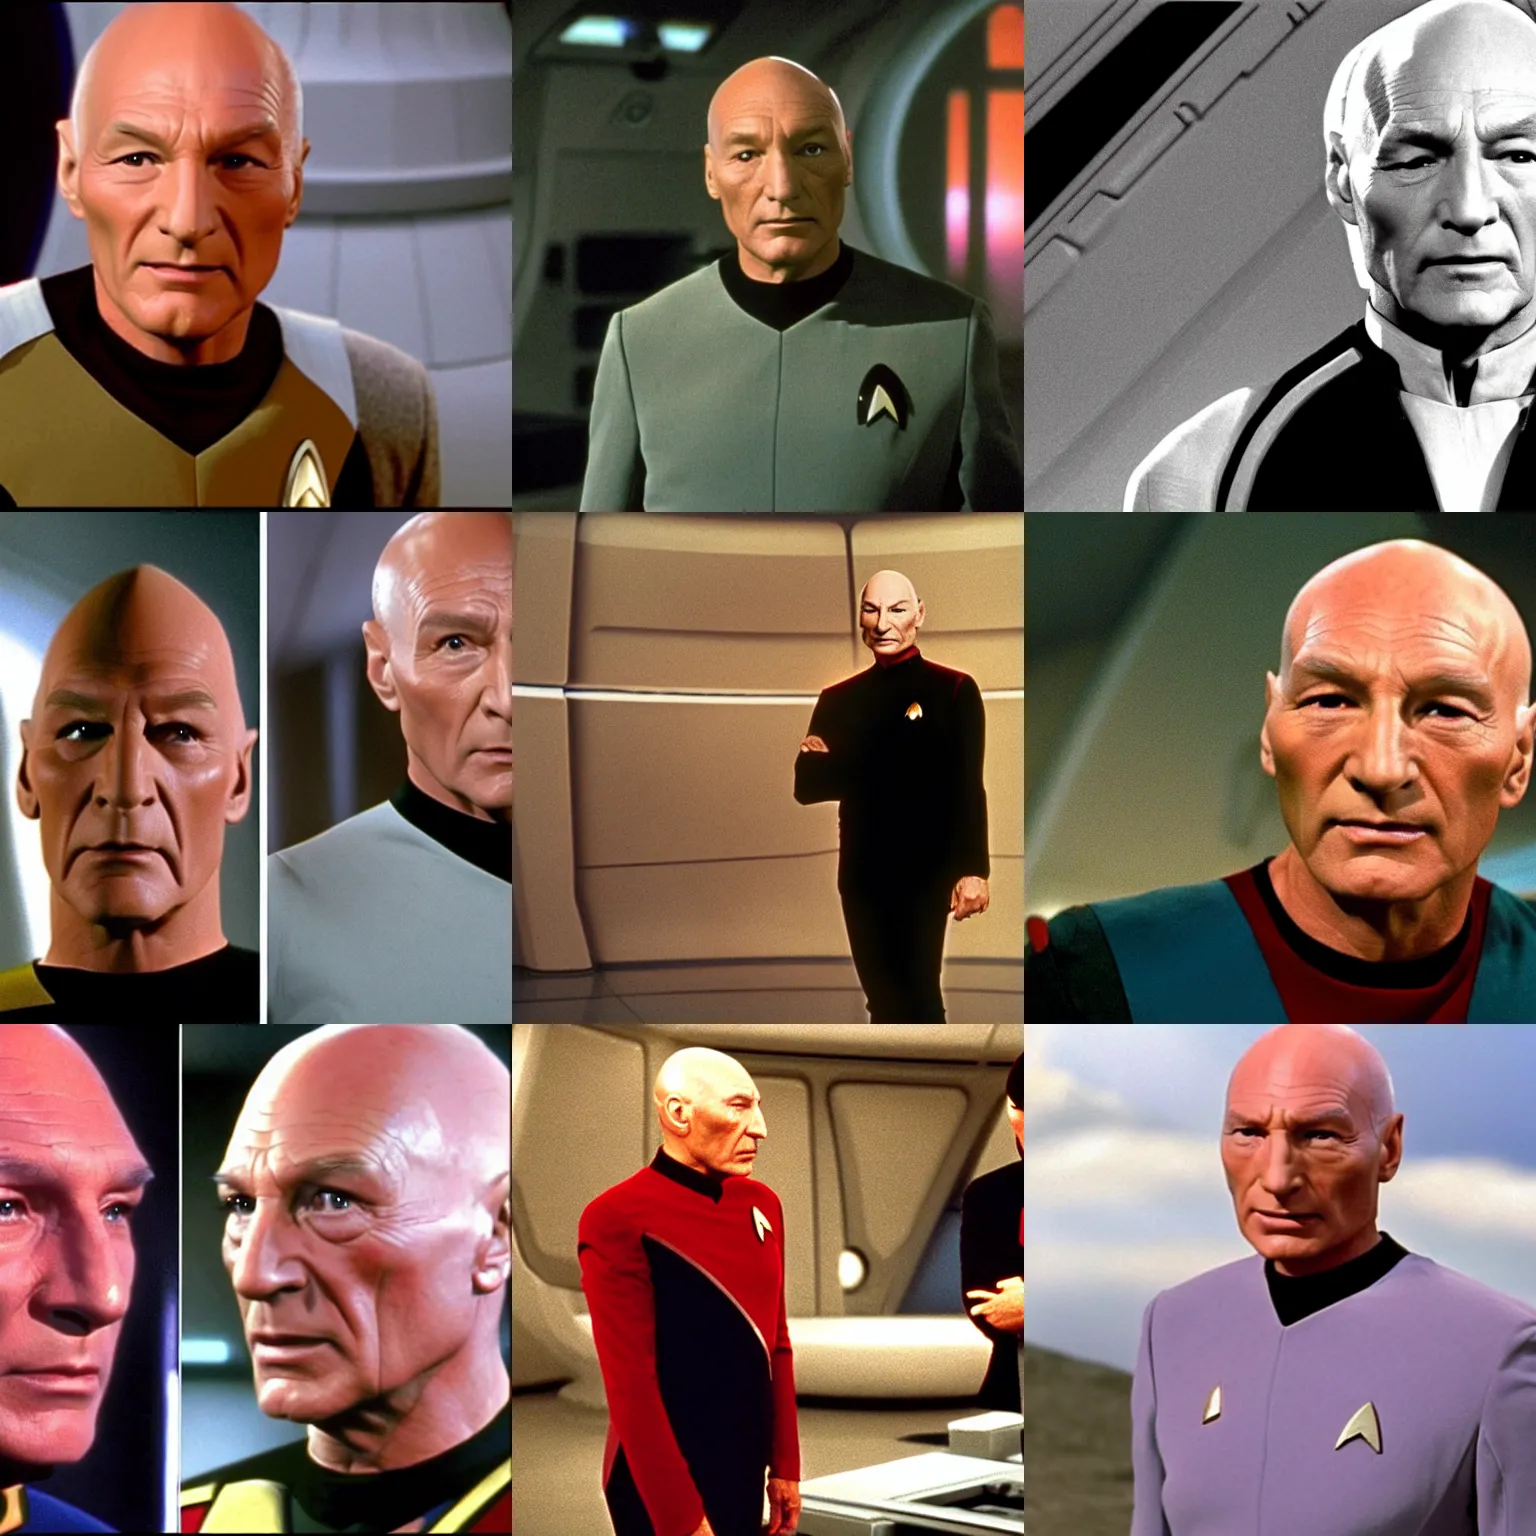 Prompt: Picard in Star Trek The Next Generation